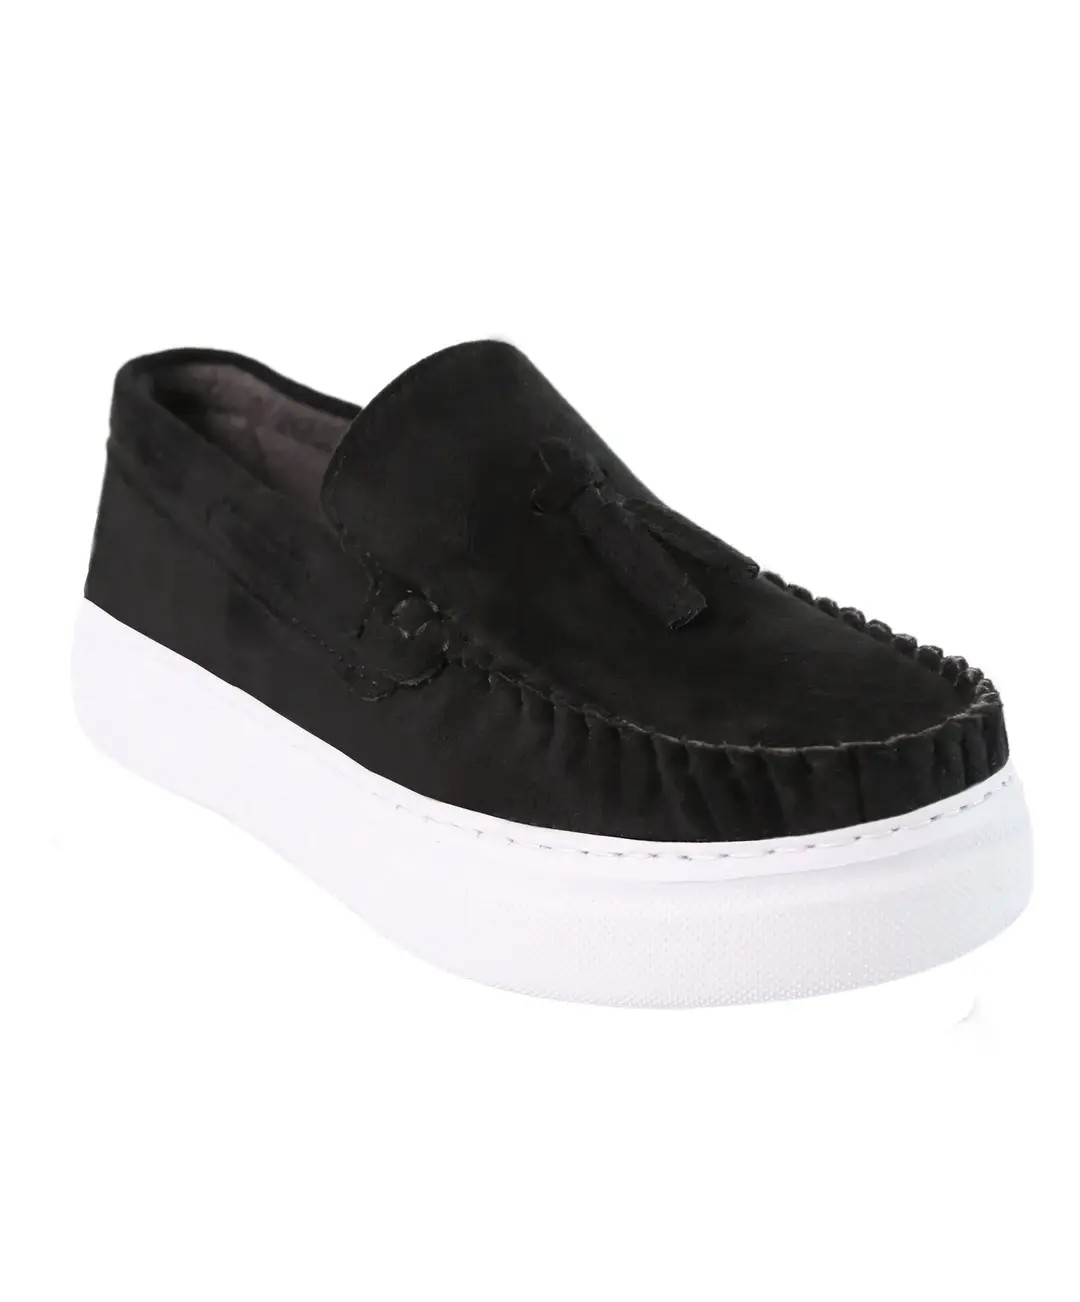 Boys Suede Slip-On Thick Sole Loafers - URBAN